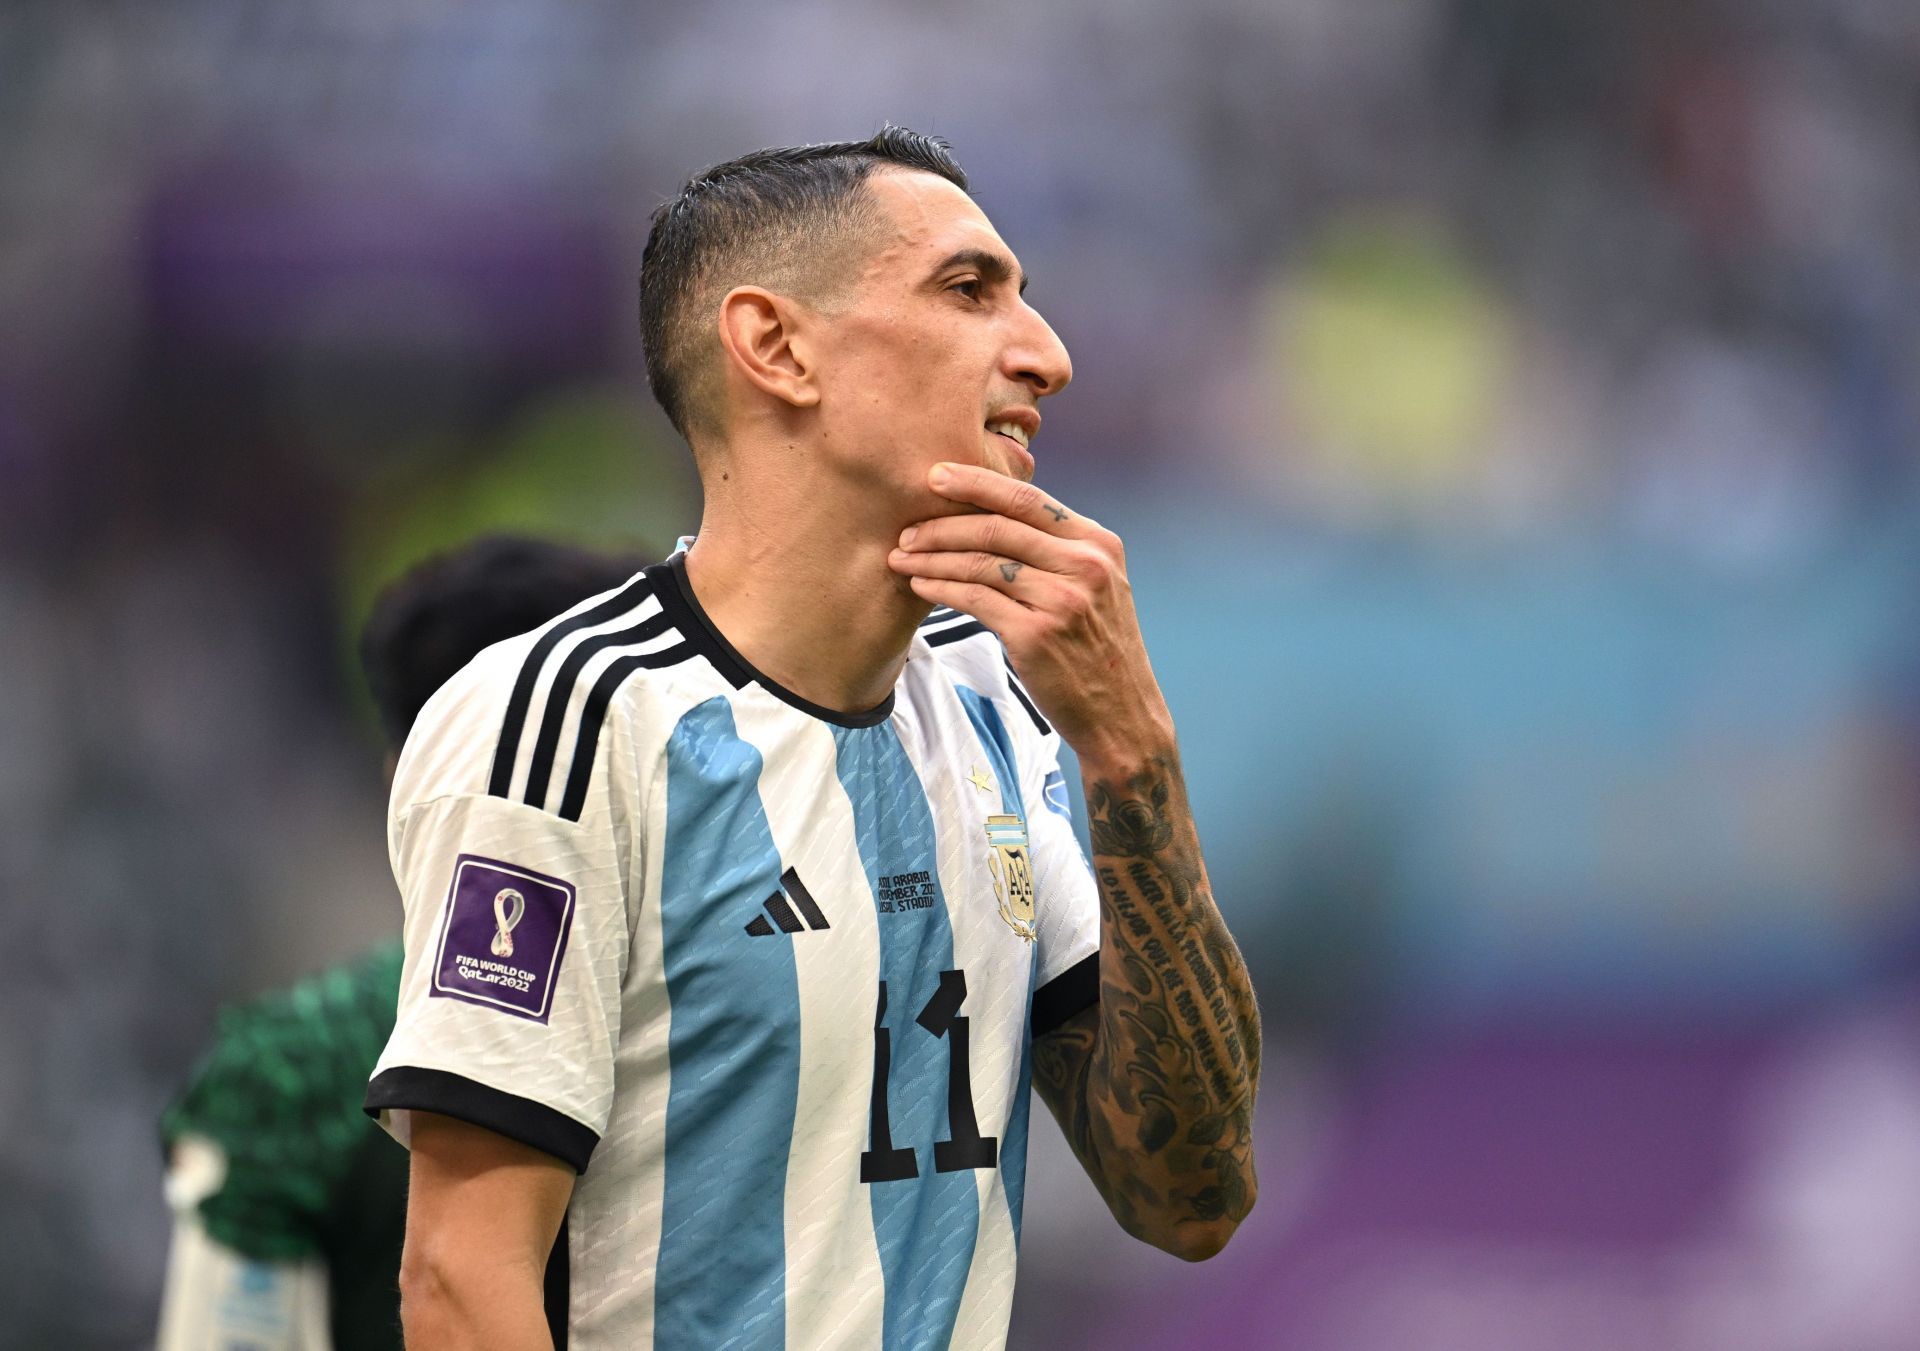 Di Maria reacts to the disappointing loss